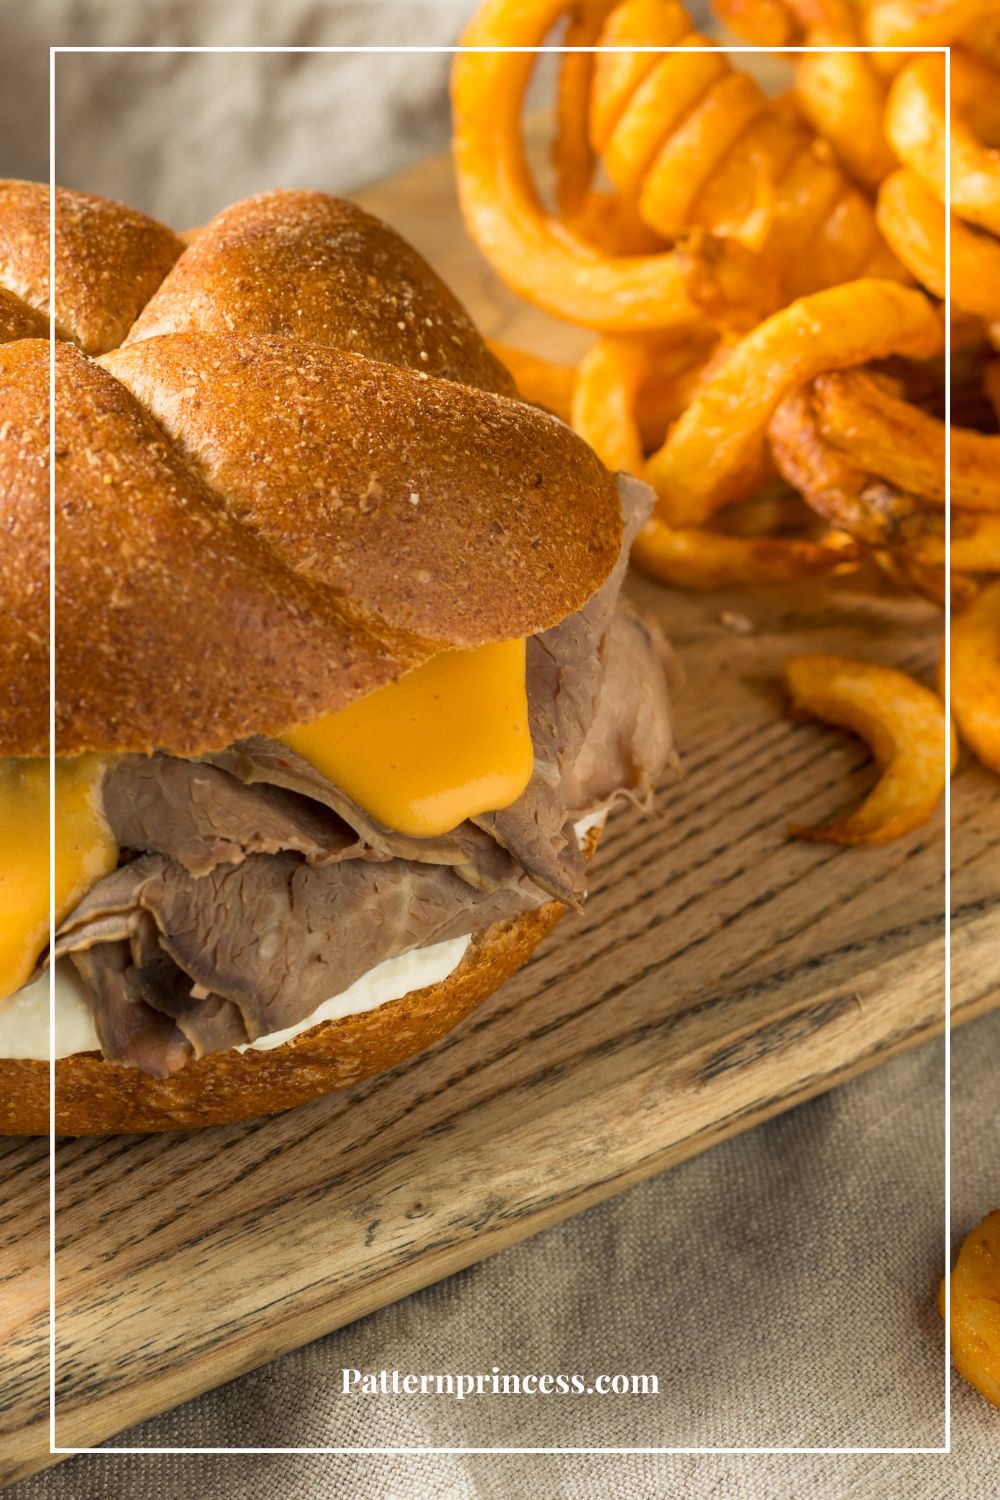 What to Serve with This Great Roast Beef Sandwich